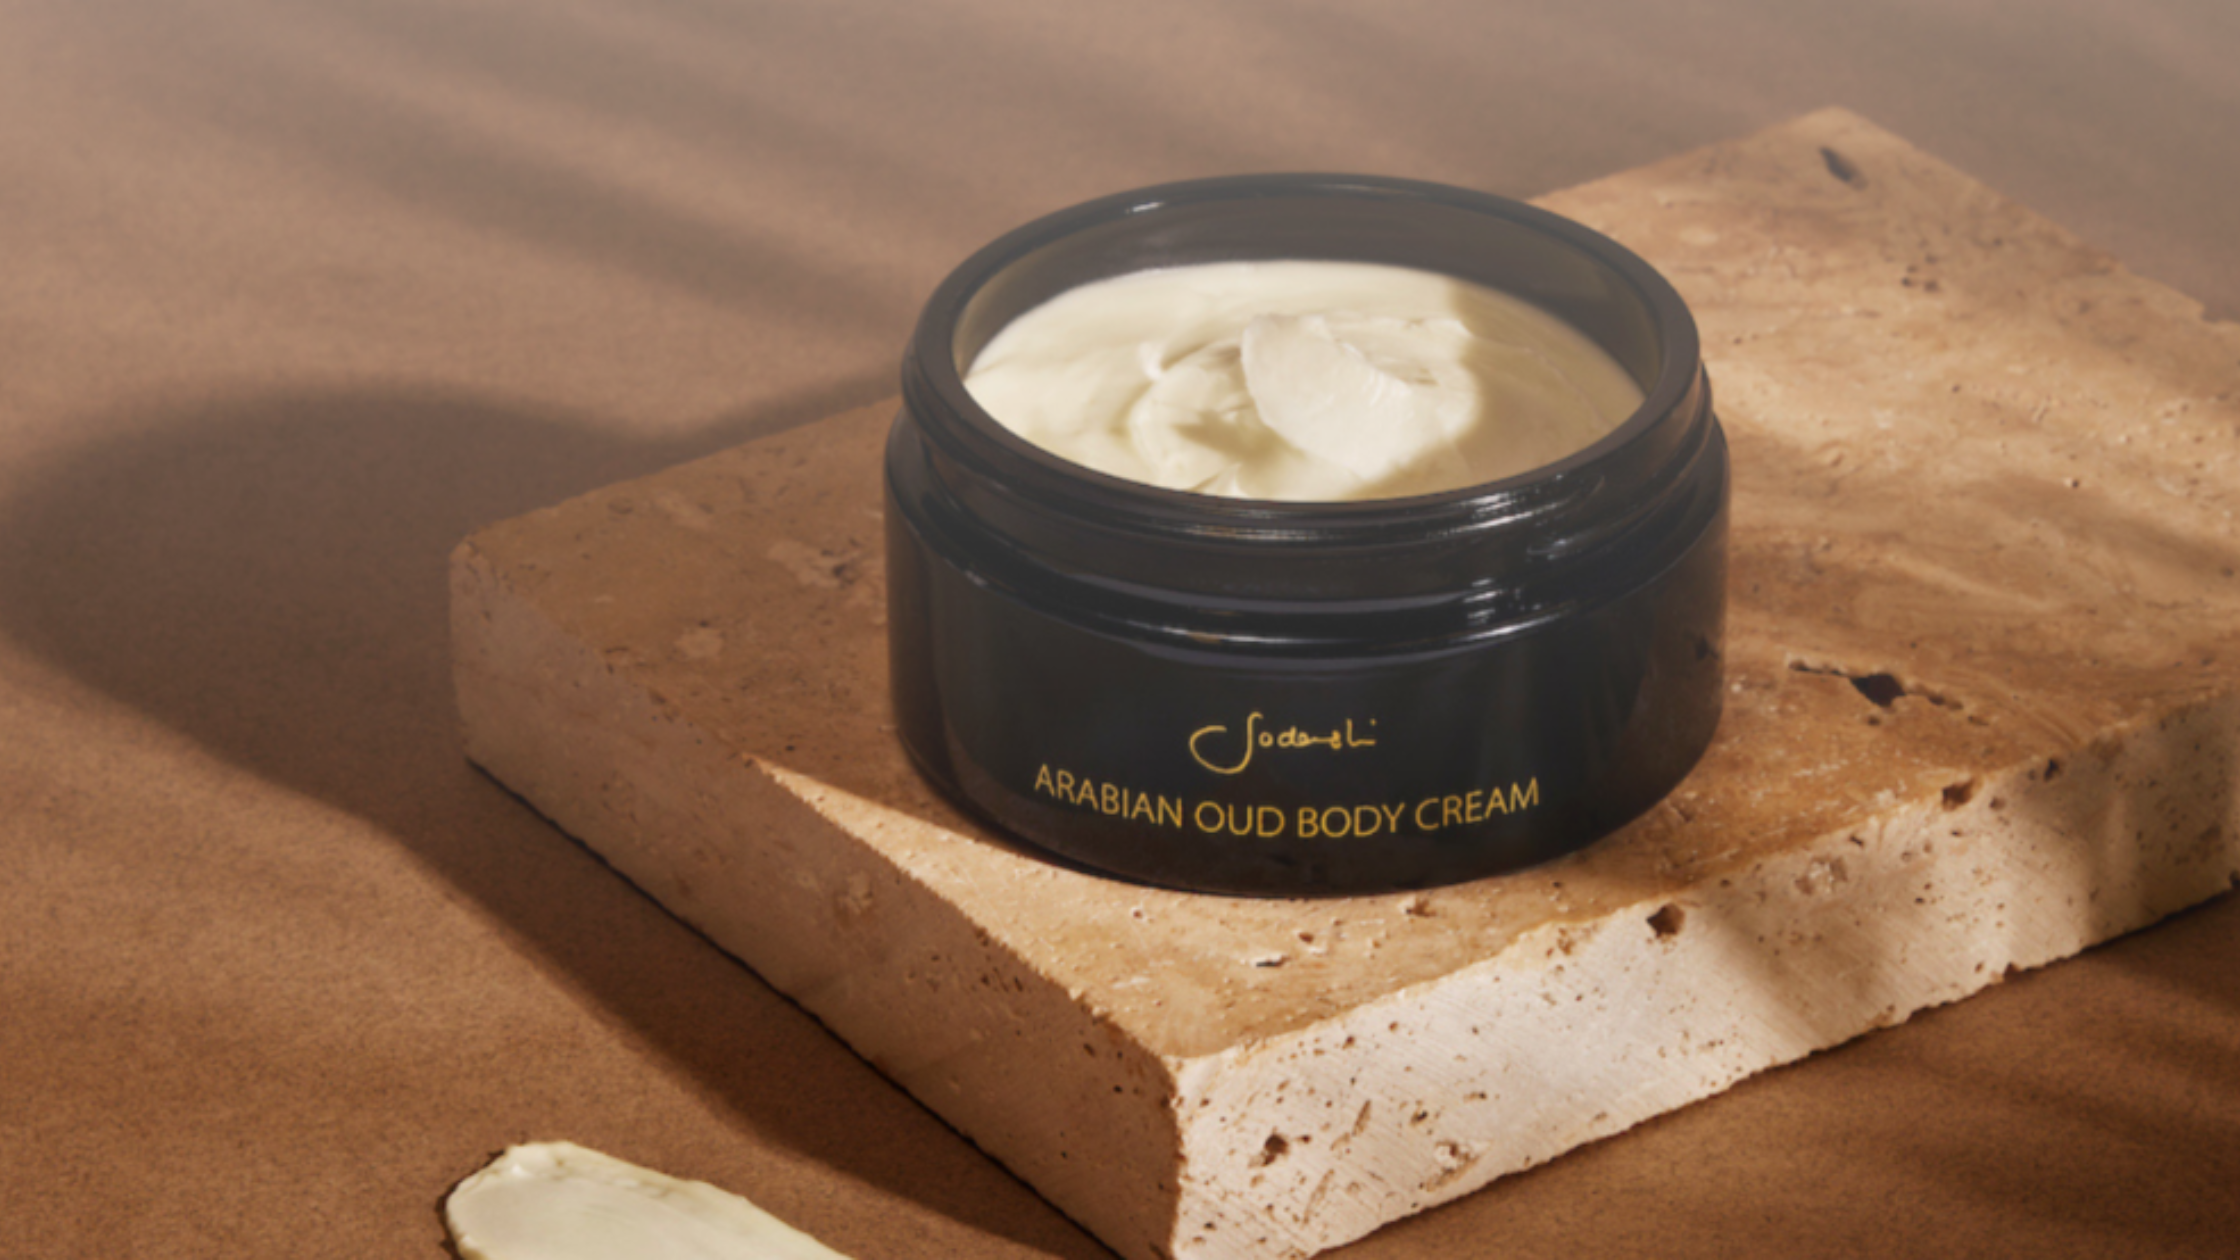 Introducing our NEW Luxe, Aromatic Oud Body Cream